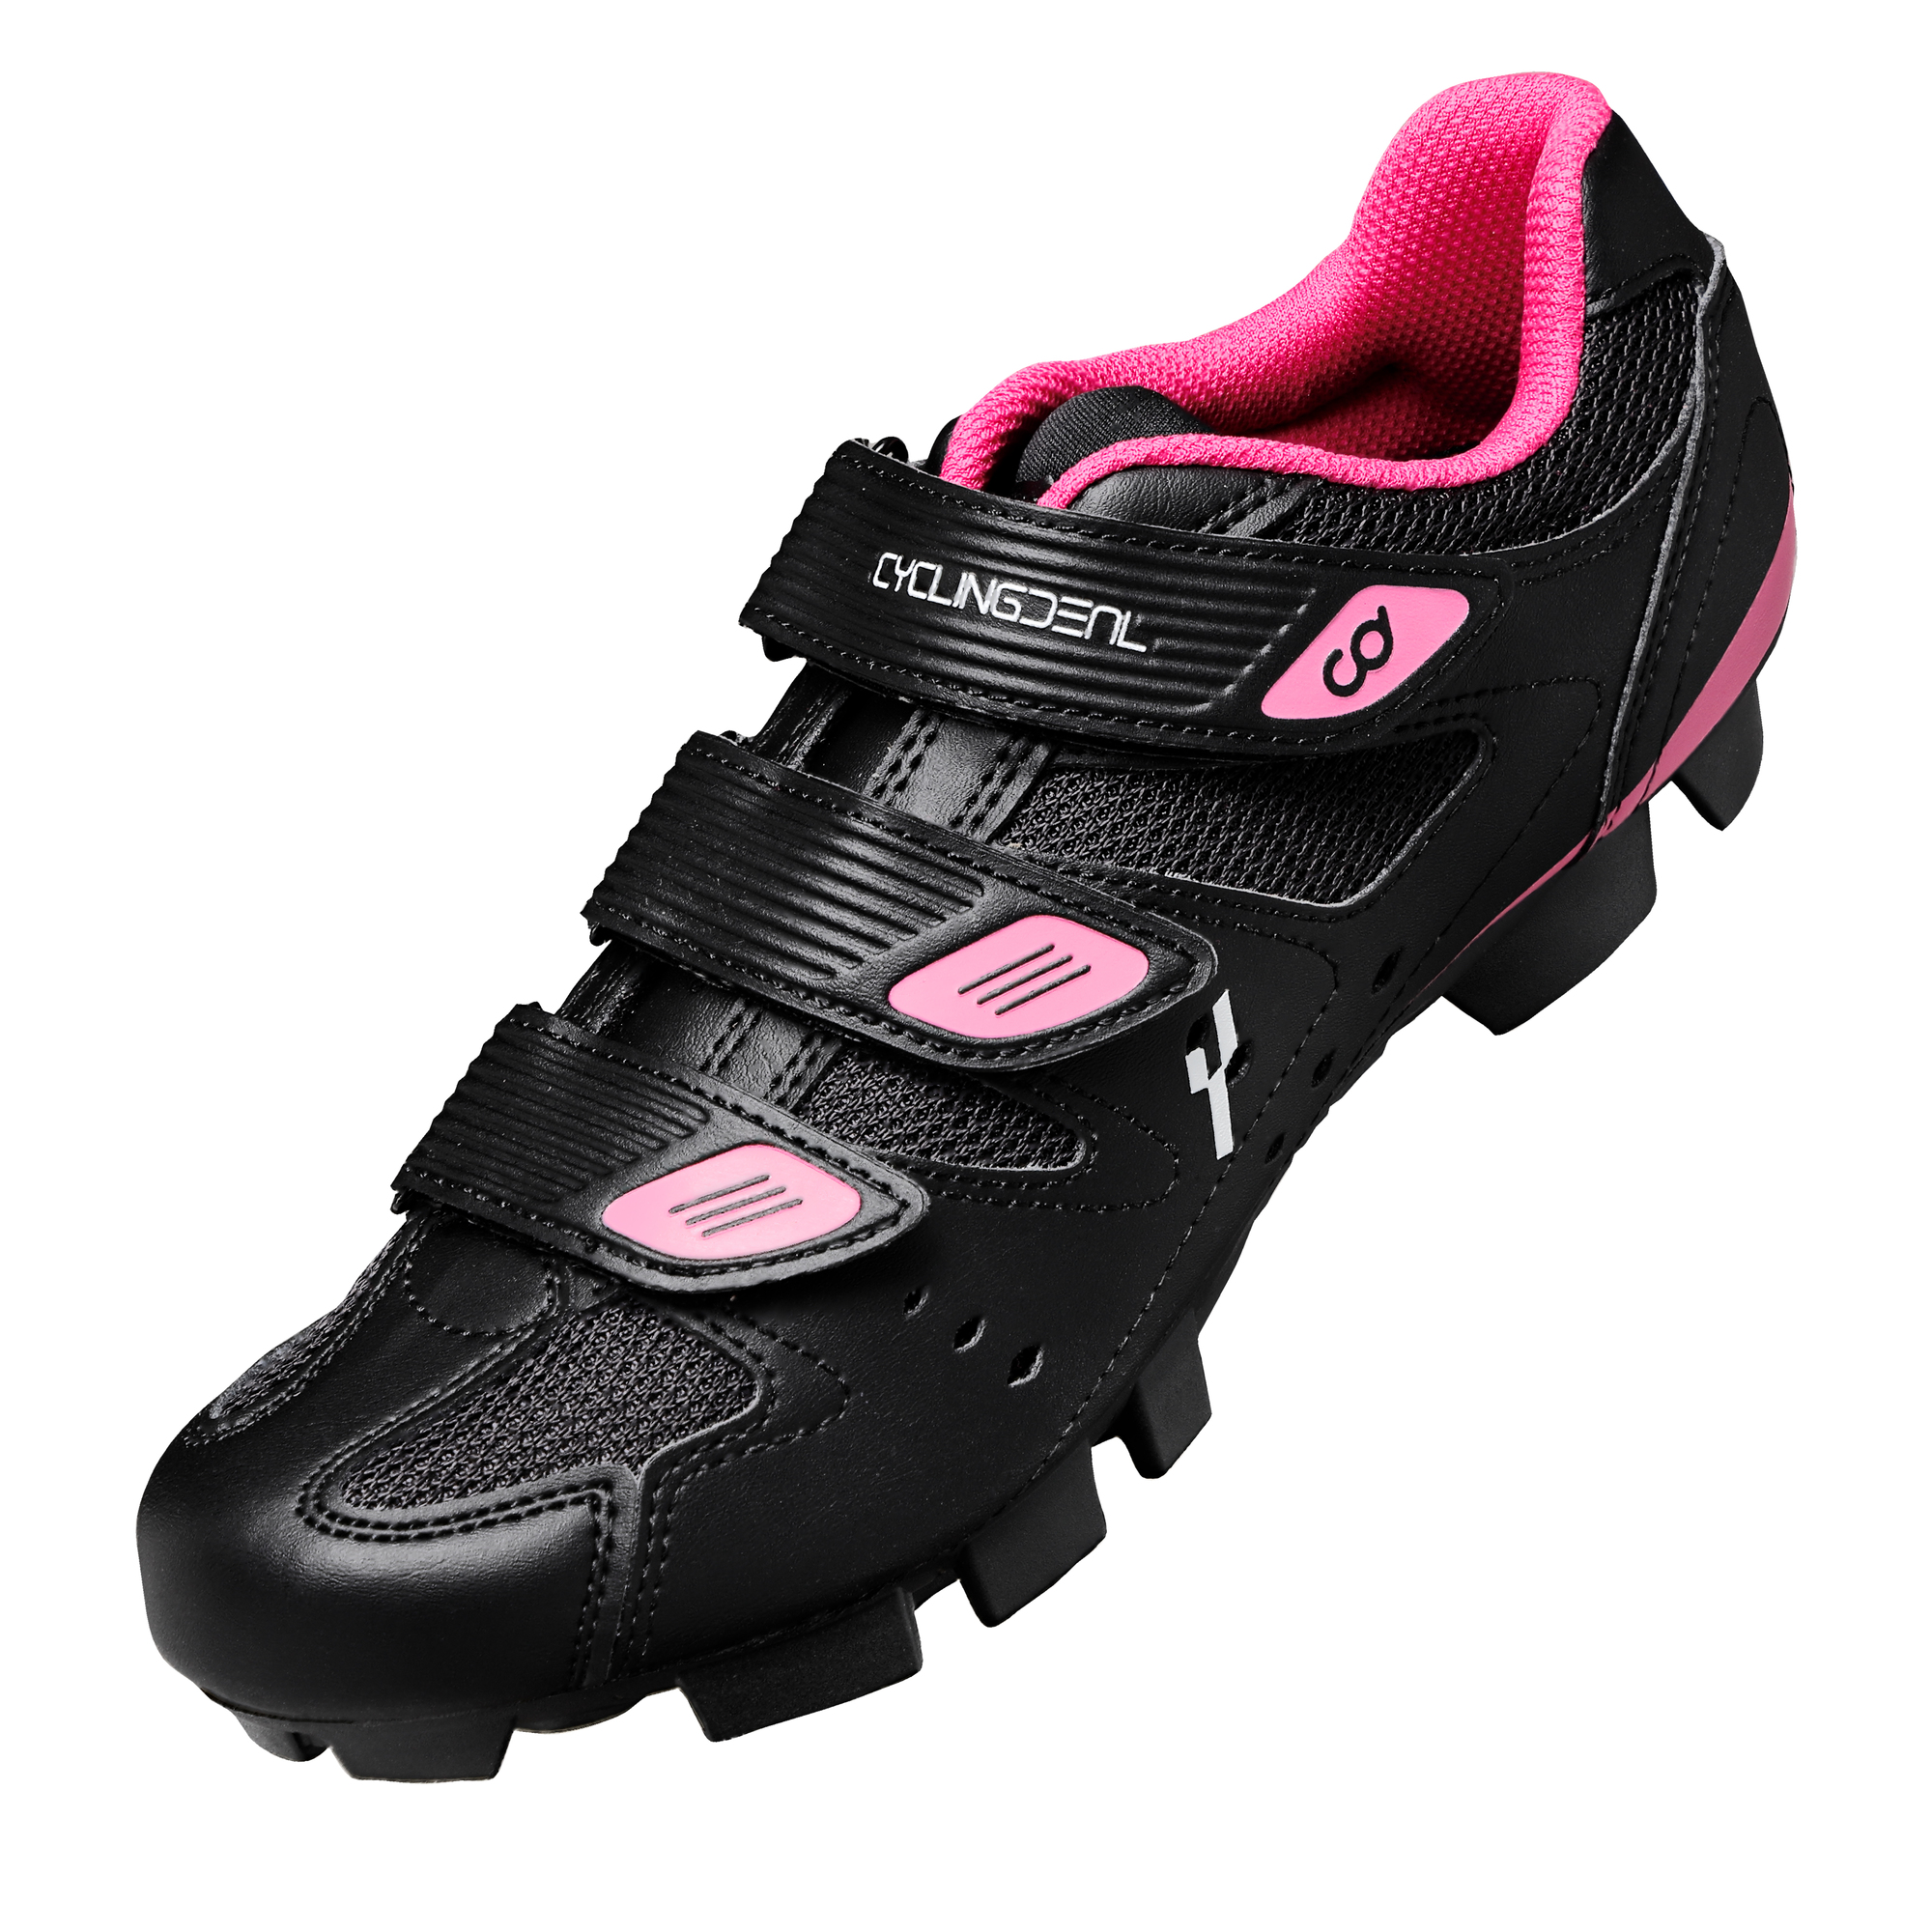 CyclingDeal Mountain Bicycle Bike Women's MTB Cycling Shoes Black Compatible with SHIMANO SPD and CrankBrothers Cleats | Size 37